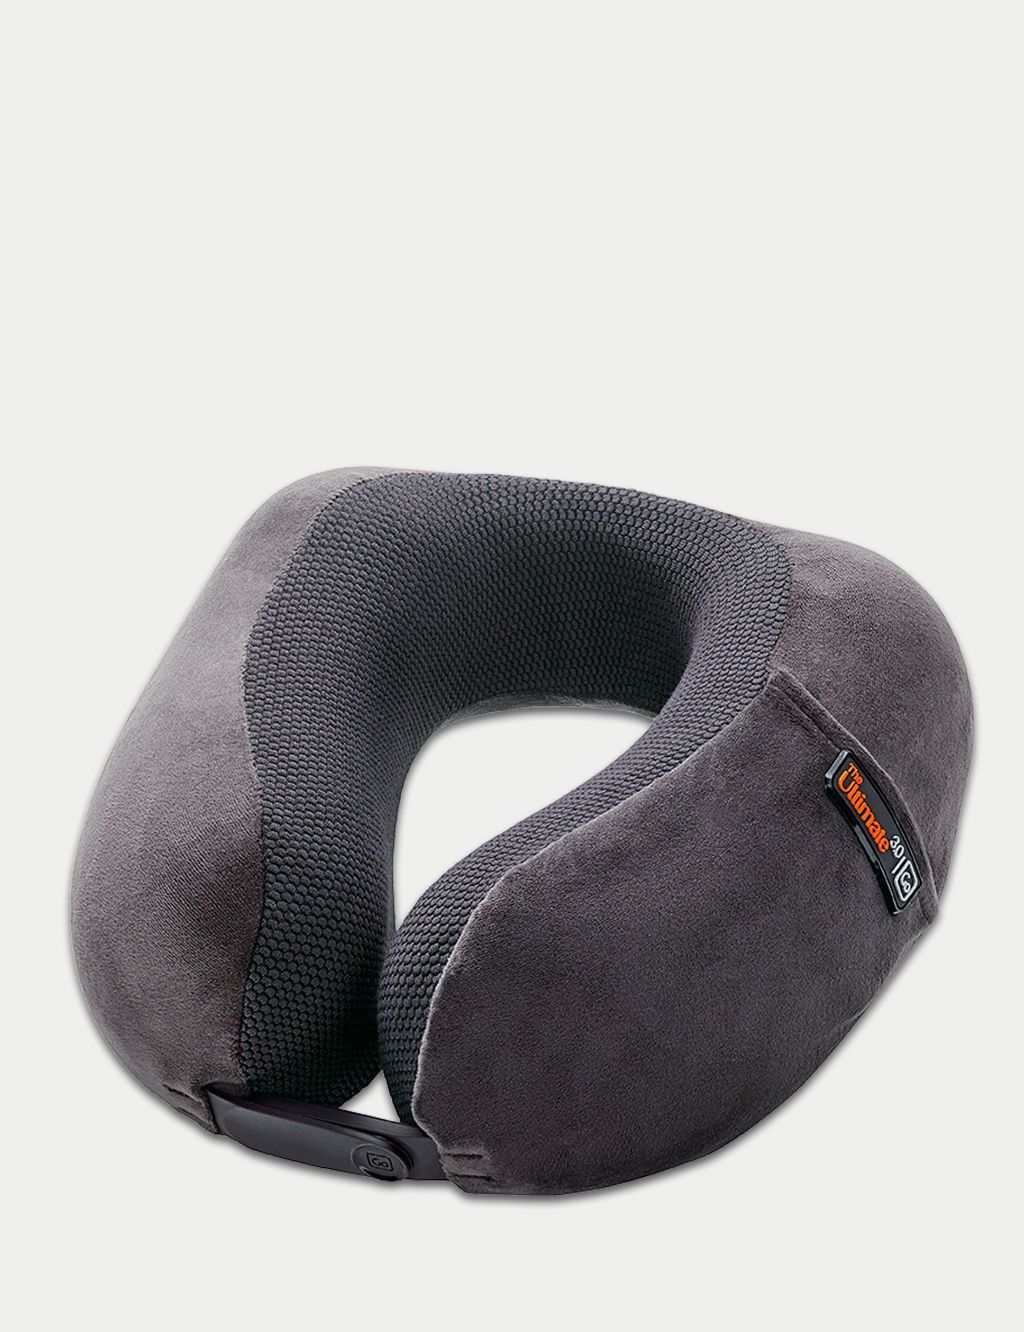 Ultimate 3.0 Travel Pillow